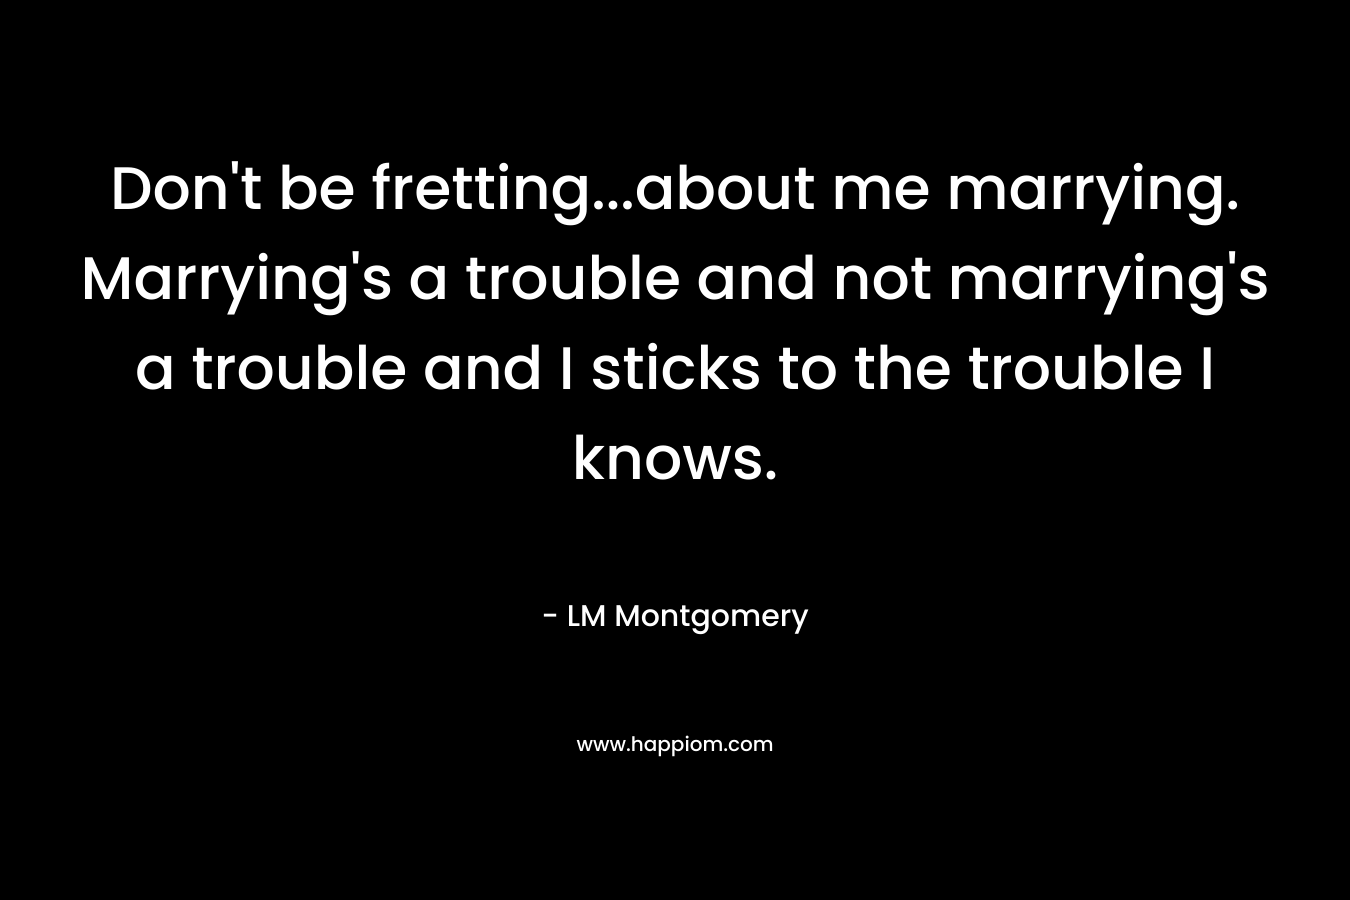 Don't be fretting...about me marrying. Marrying's a trouble and not marrying's a trouble and I sticks to the trouble I knows.